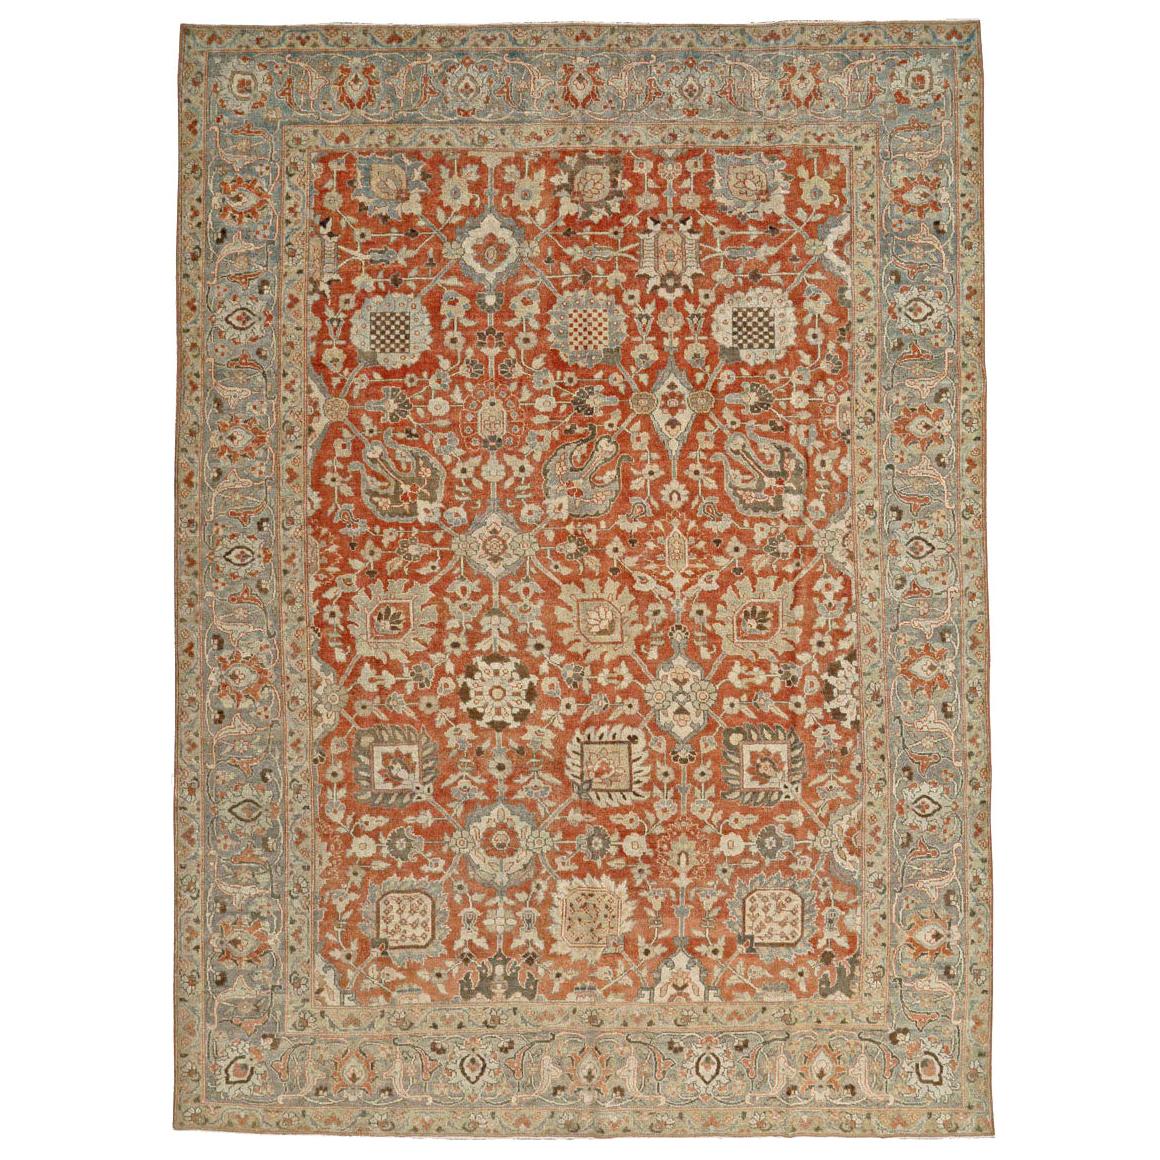 Early 20th Century Handmade Persian Tabriz Room Size Carpet in Rust and Grey For Sale